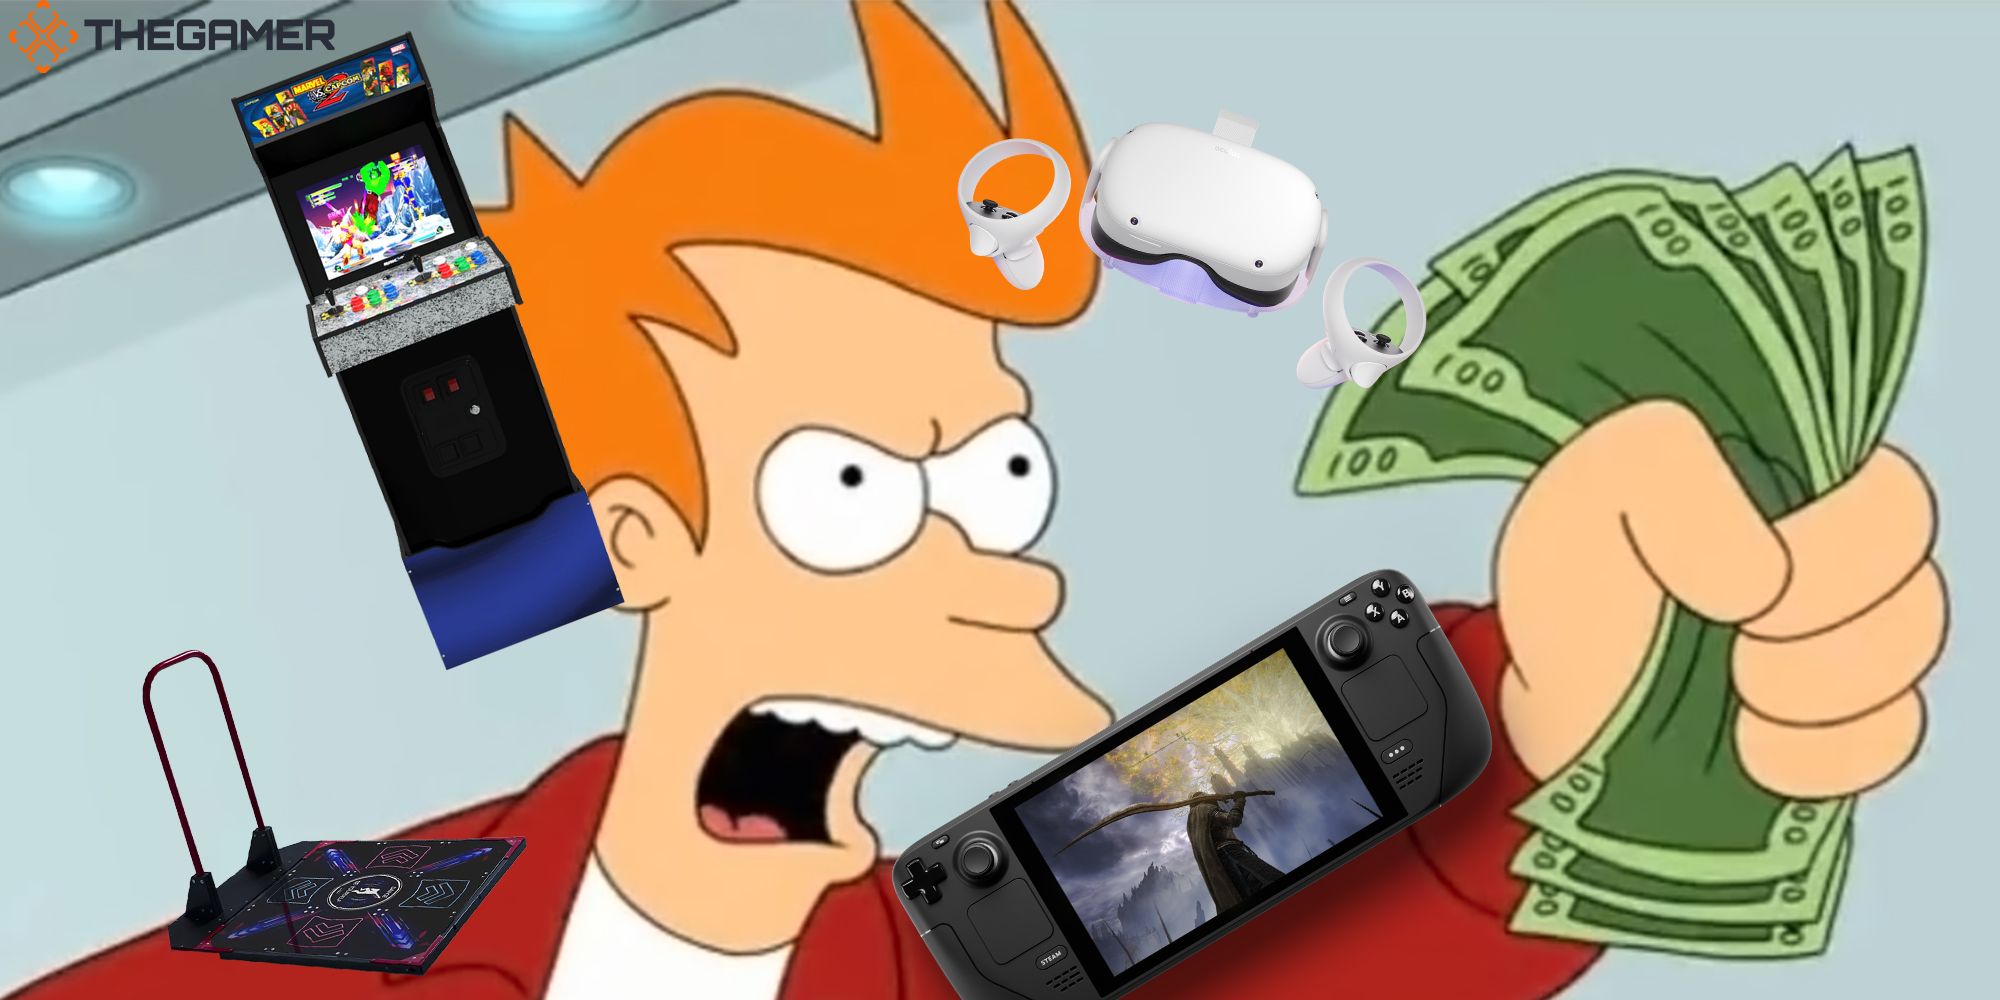 Expensive game hardware circles Philip J Fry's mind as he tells companies to 